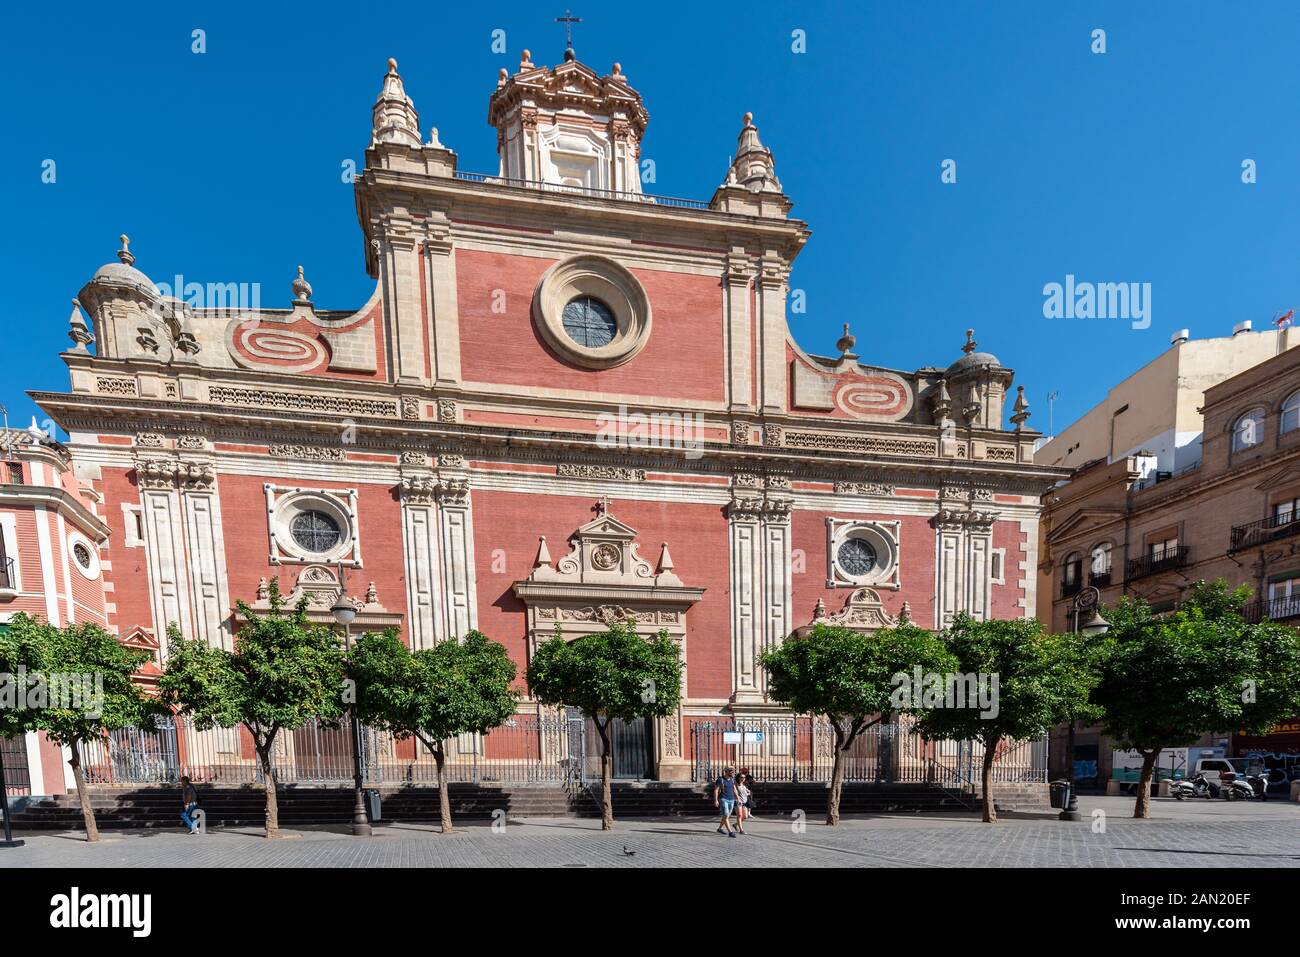 The ornate mannerist facade of the Iglesia Colegial del Salvador, Seville's 2nd largest church, stands on the former site of the city's largest mosque Stock Photo